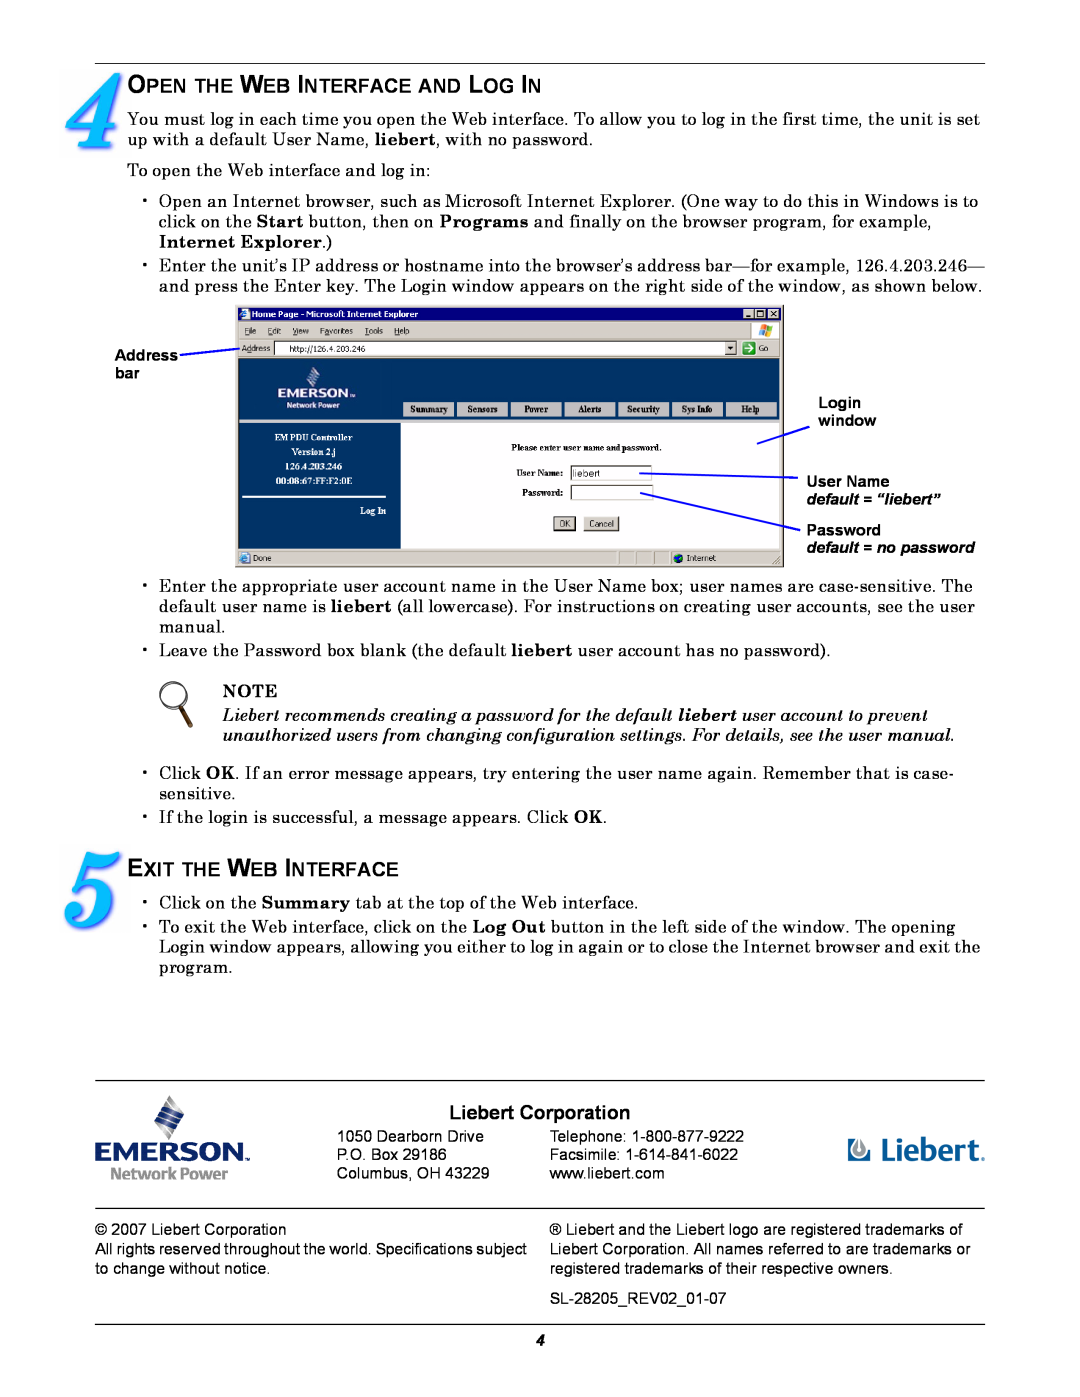 Emerson EM quick start Open The Web Interface And Log In, Exit The Web Interface, Liebert Corporation 